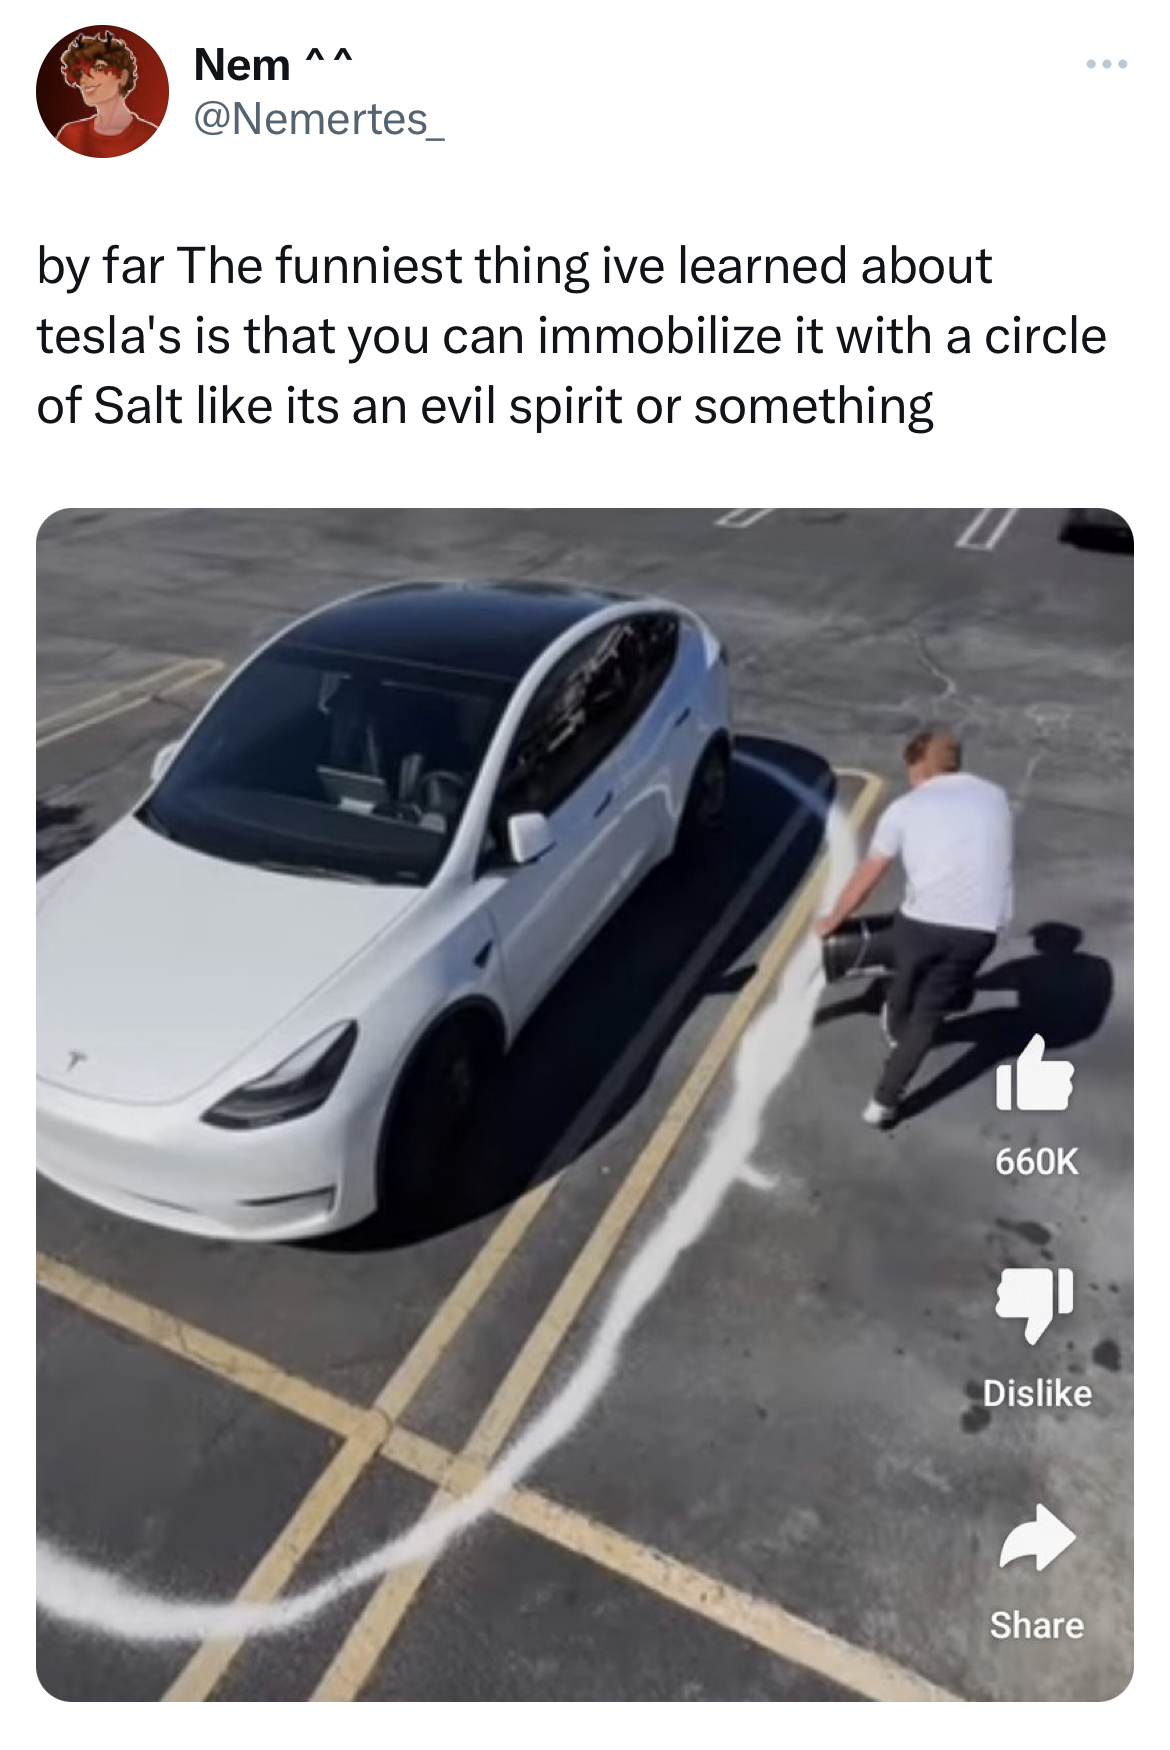 savage and funny tweets -vehicle door - Nem ^^ www by far The funniest thing ive learned about tesla's is that you can immobilize it with a circle of Salt its an evil spirit or something Dis